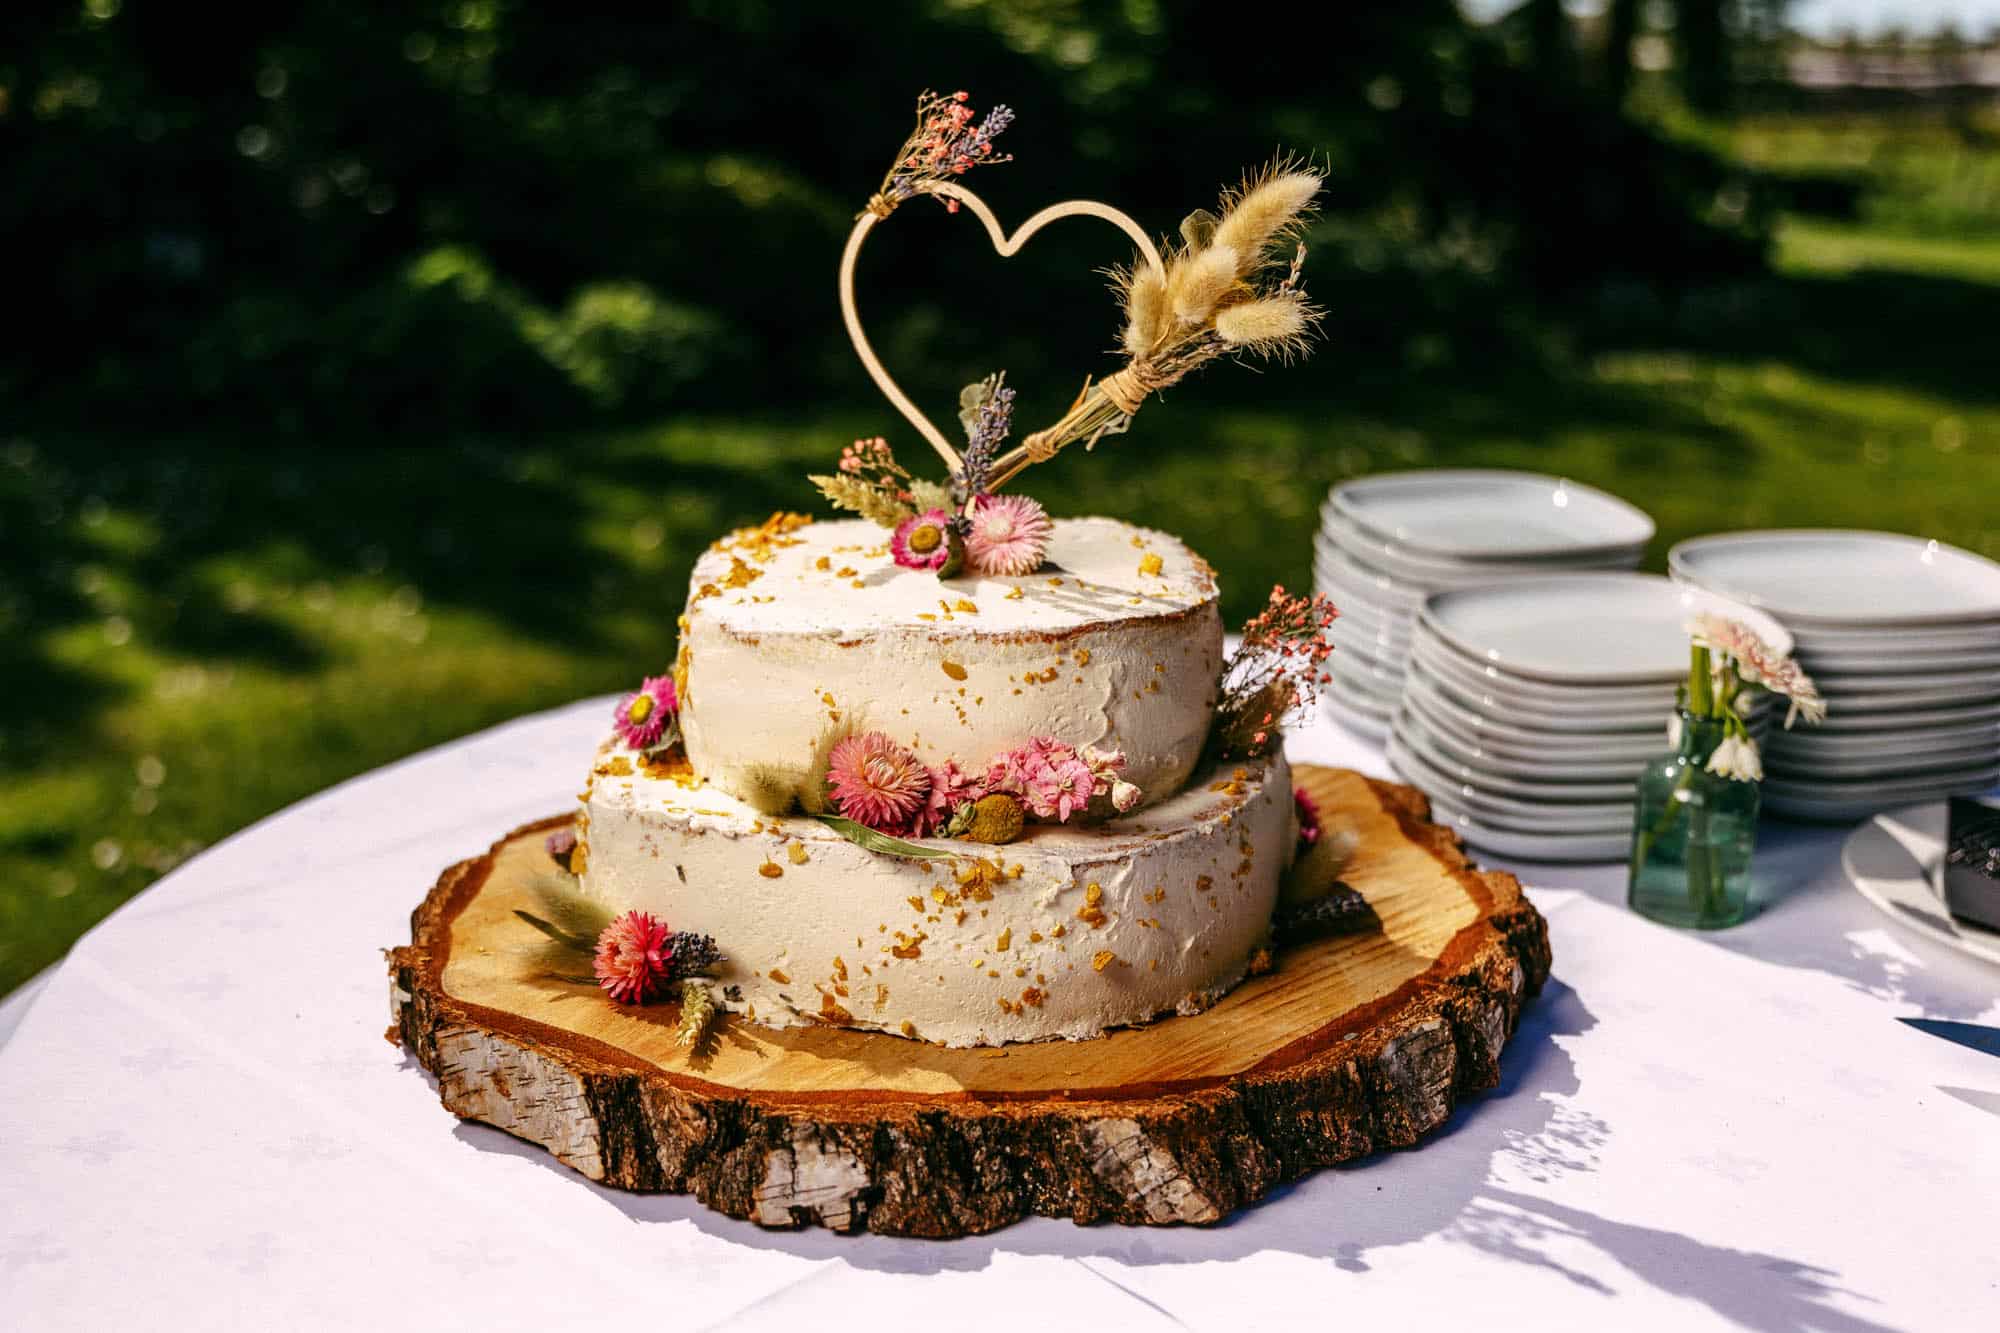 Description: A wedding cake with flowers on top of a wooden board.